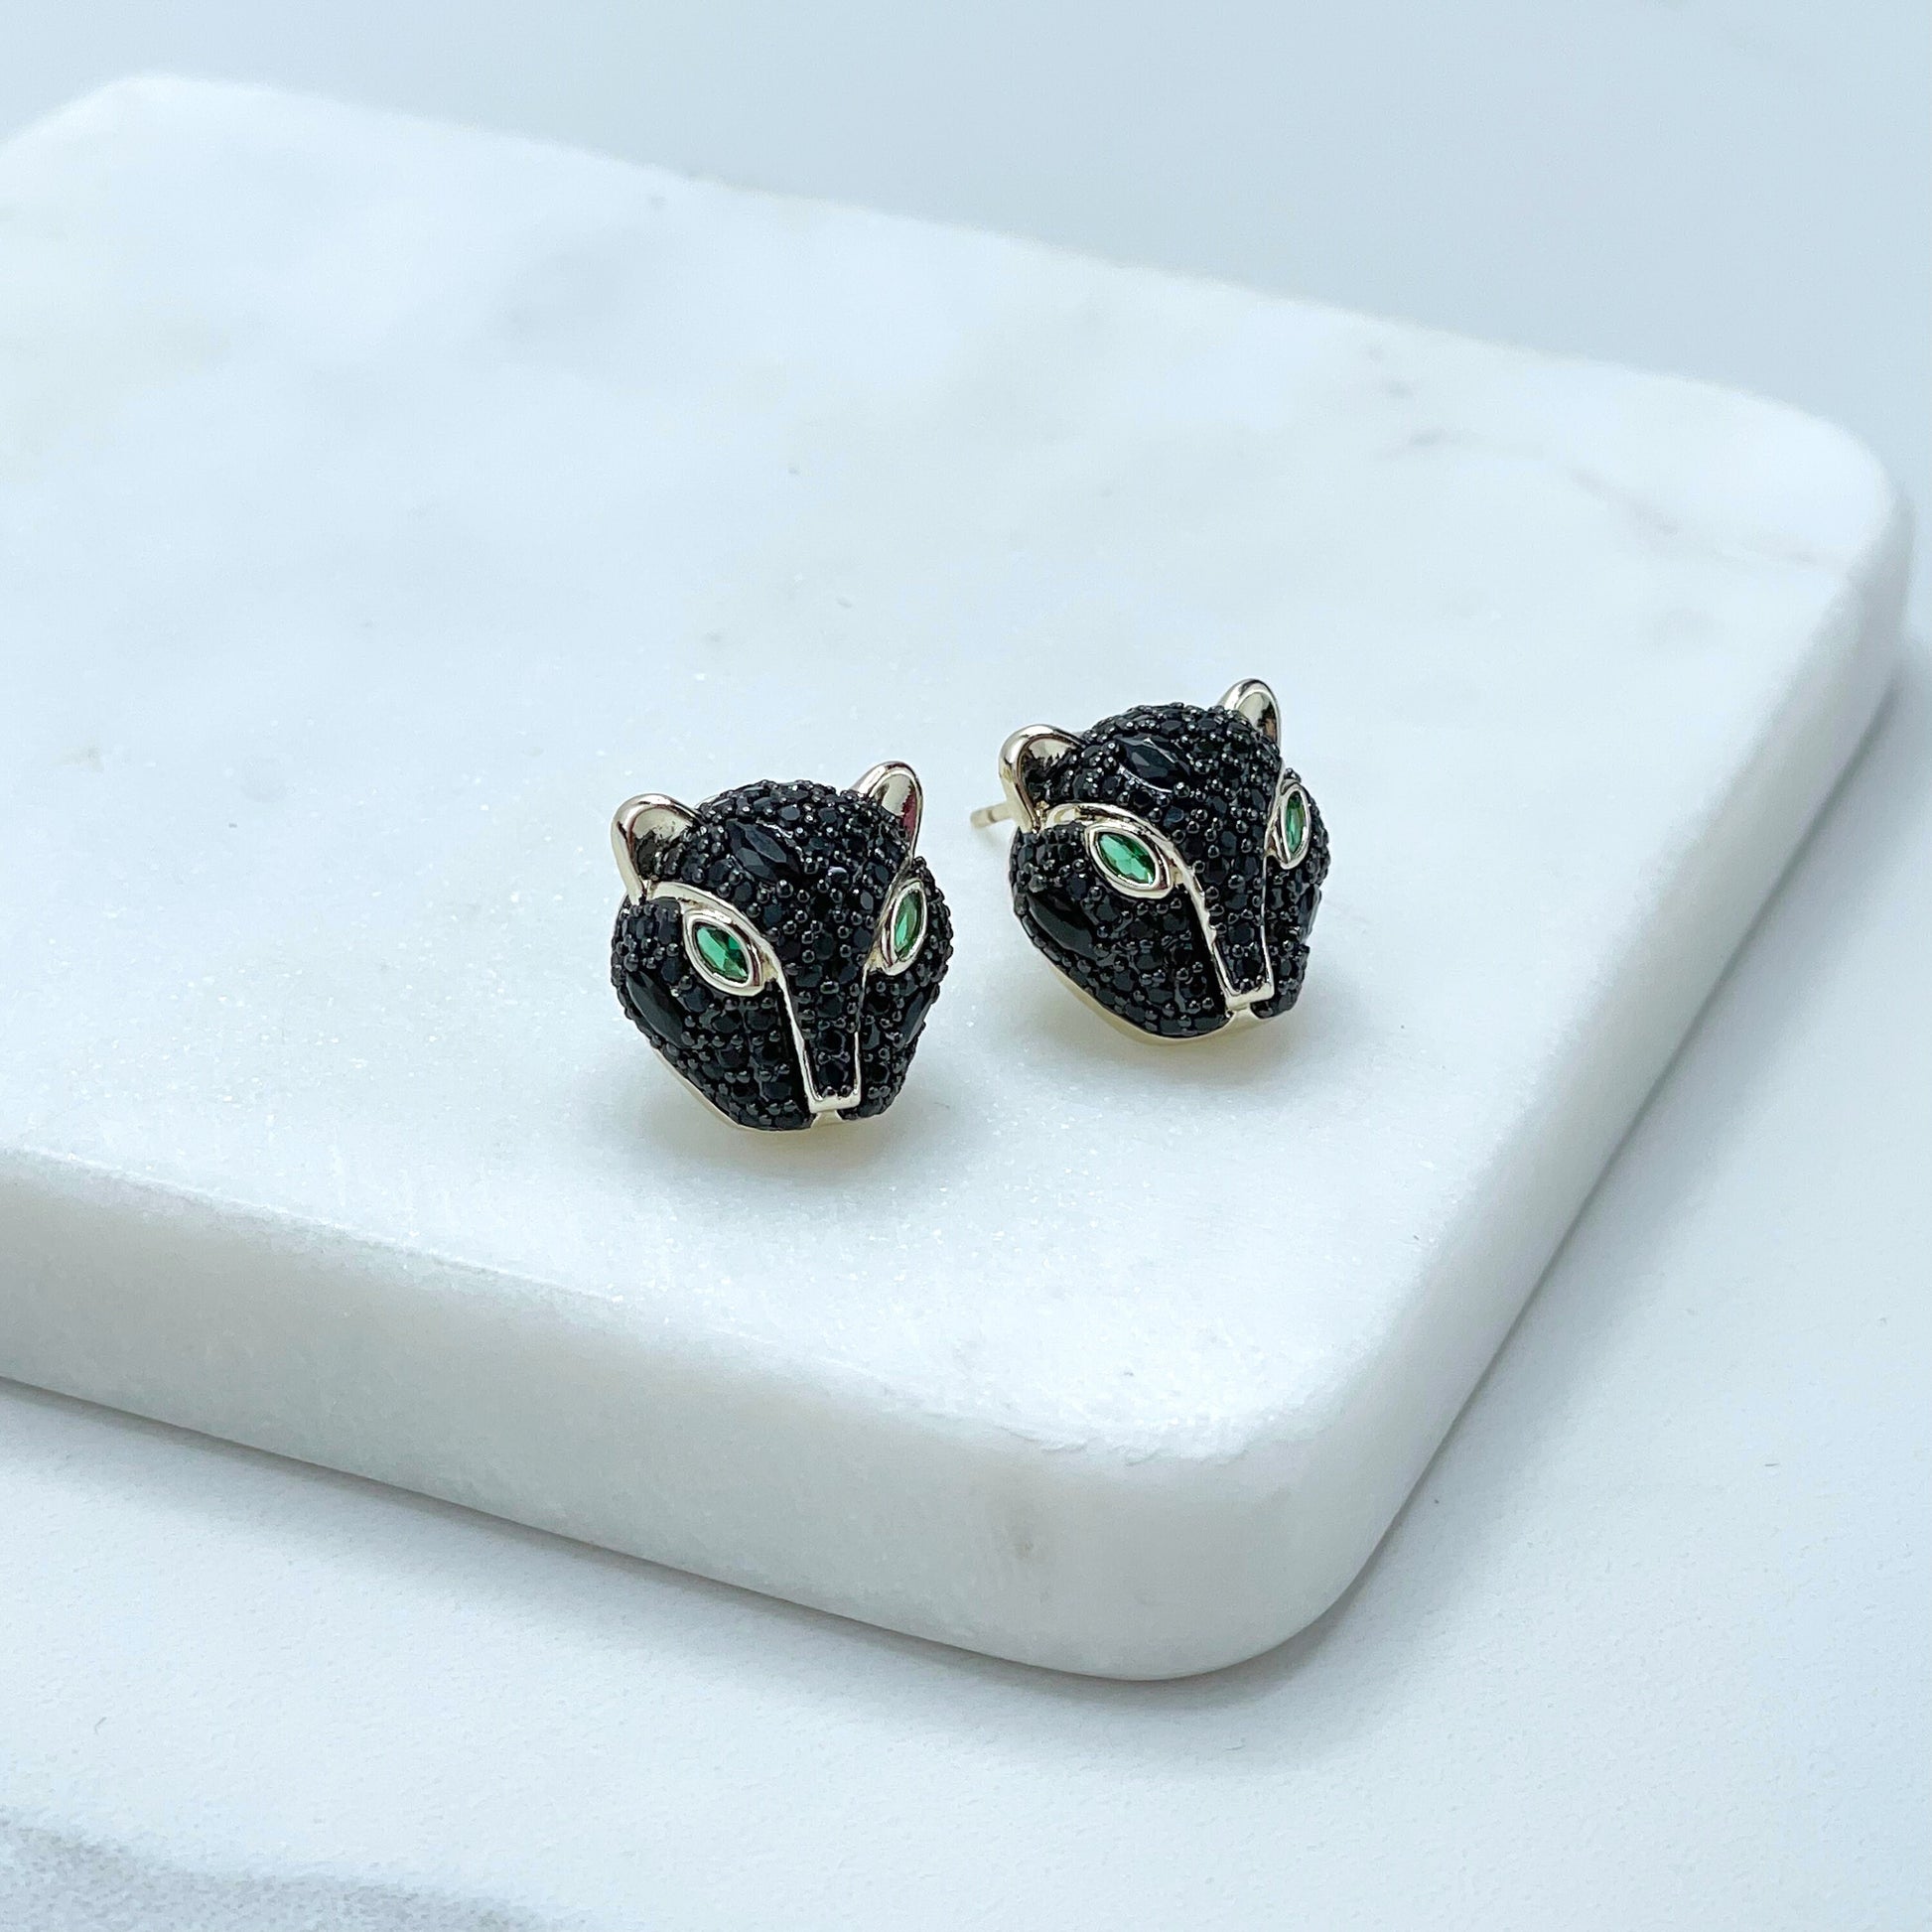 18k Gold Filled Black Micro Pave Cubic Zirconia with Panther Head Design Stud Earrings Wholesale Jewelry Making Supplies